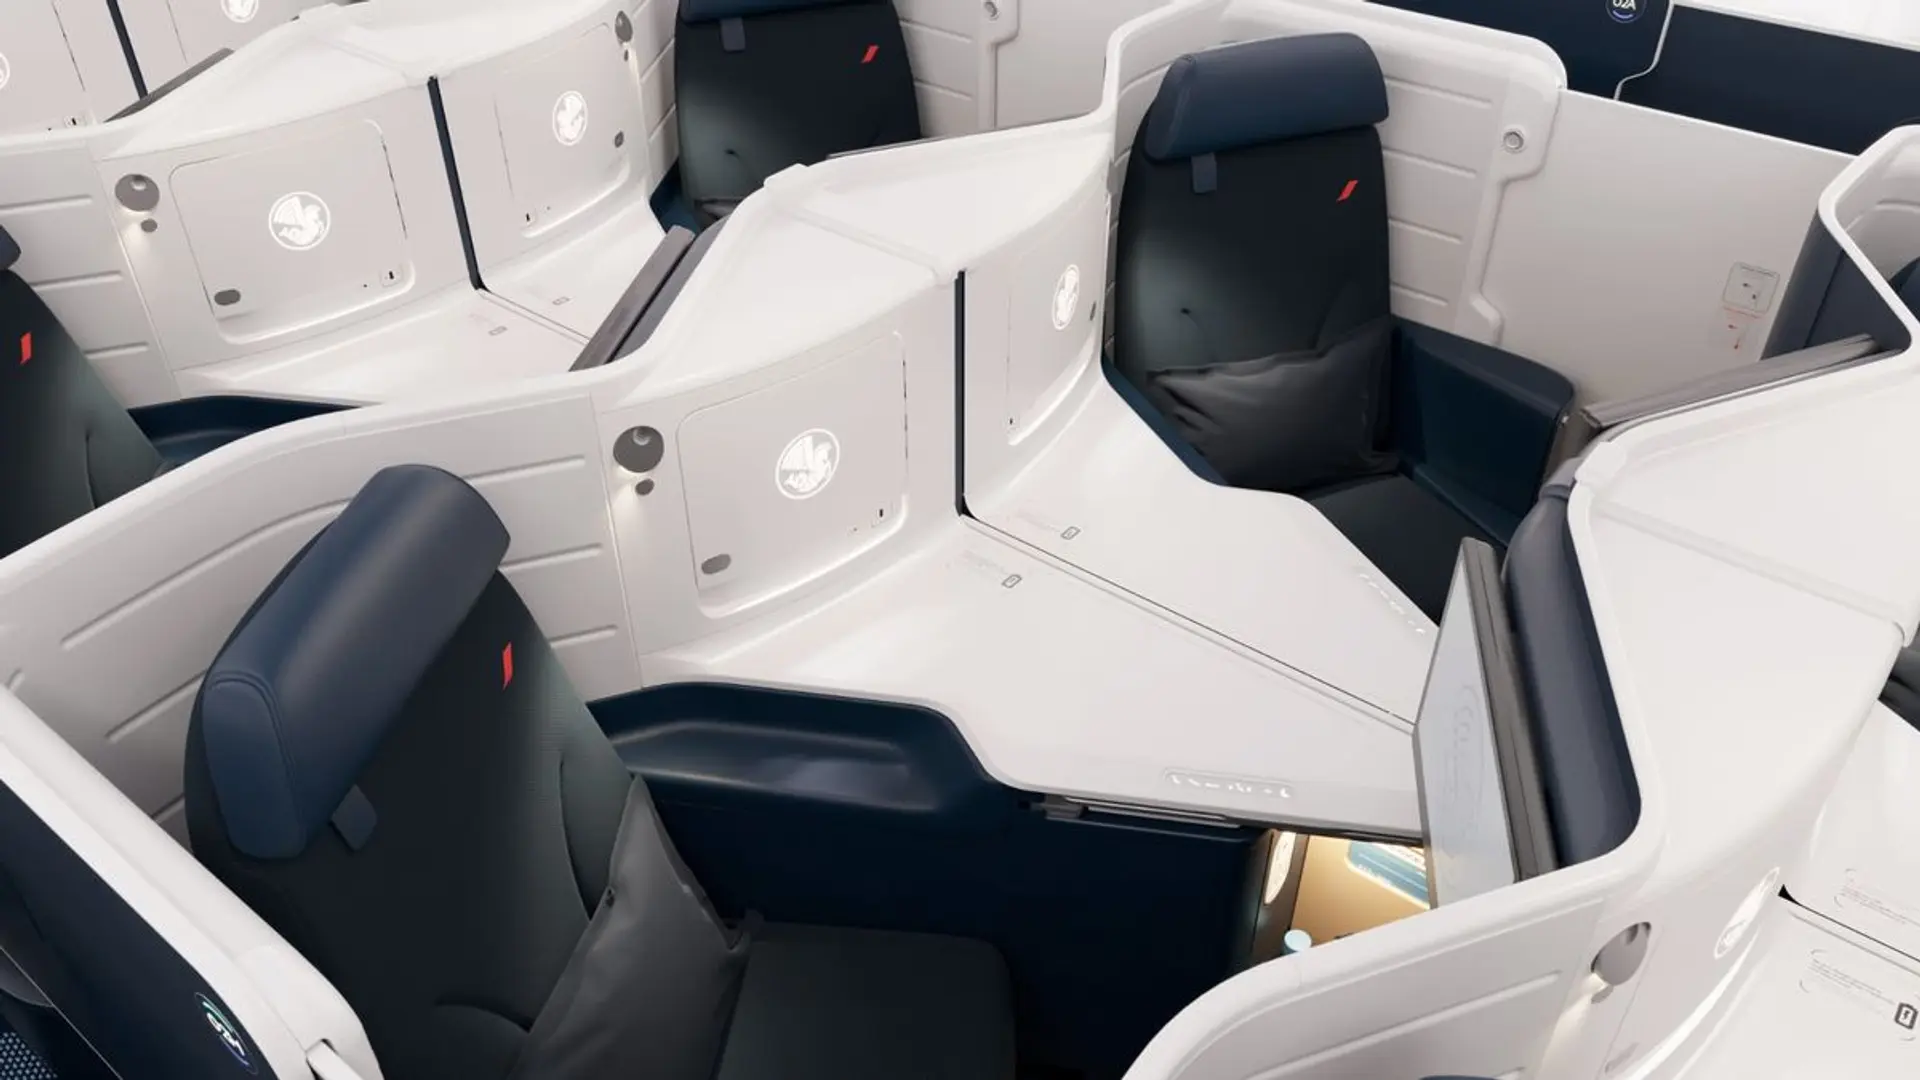 Airlines News - Air France unveils new Boeing 777 Business Class cabin 